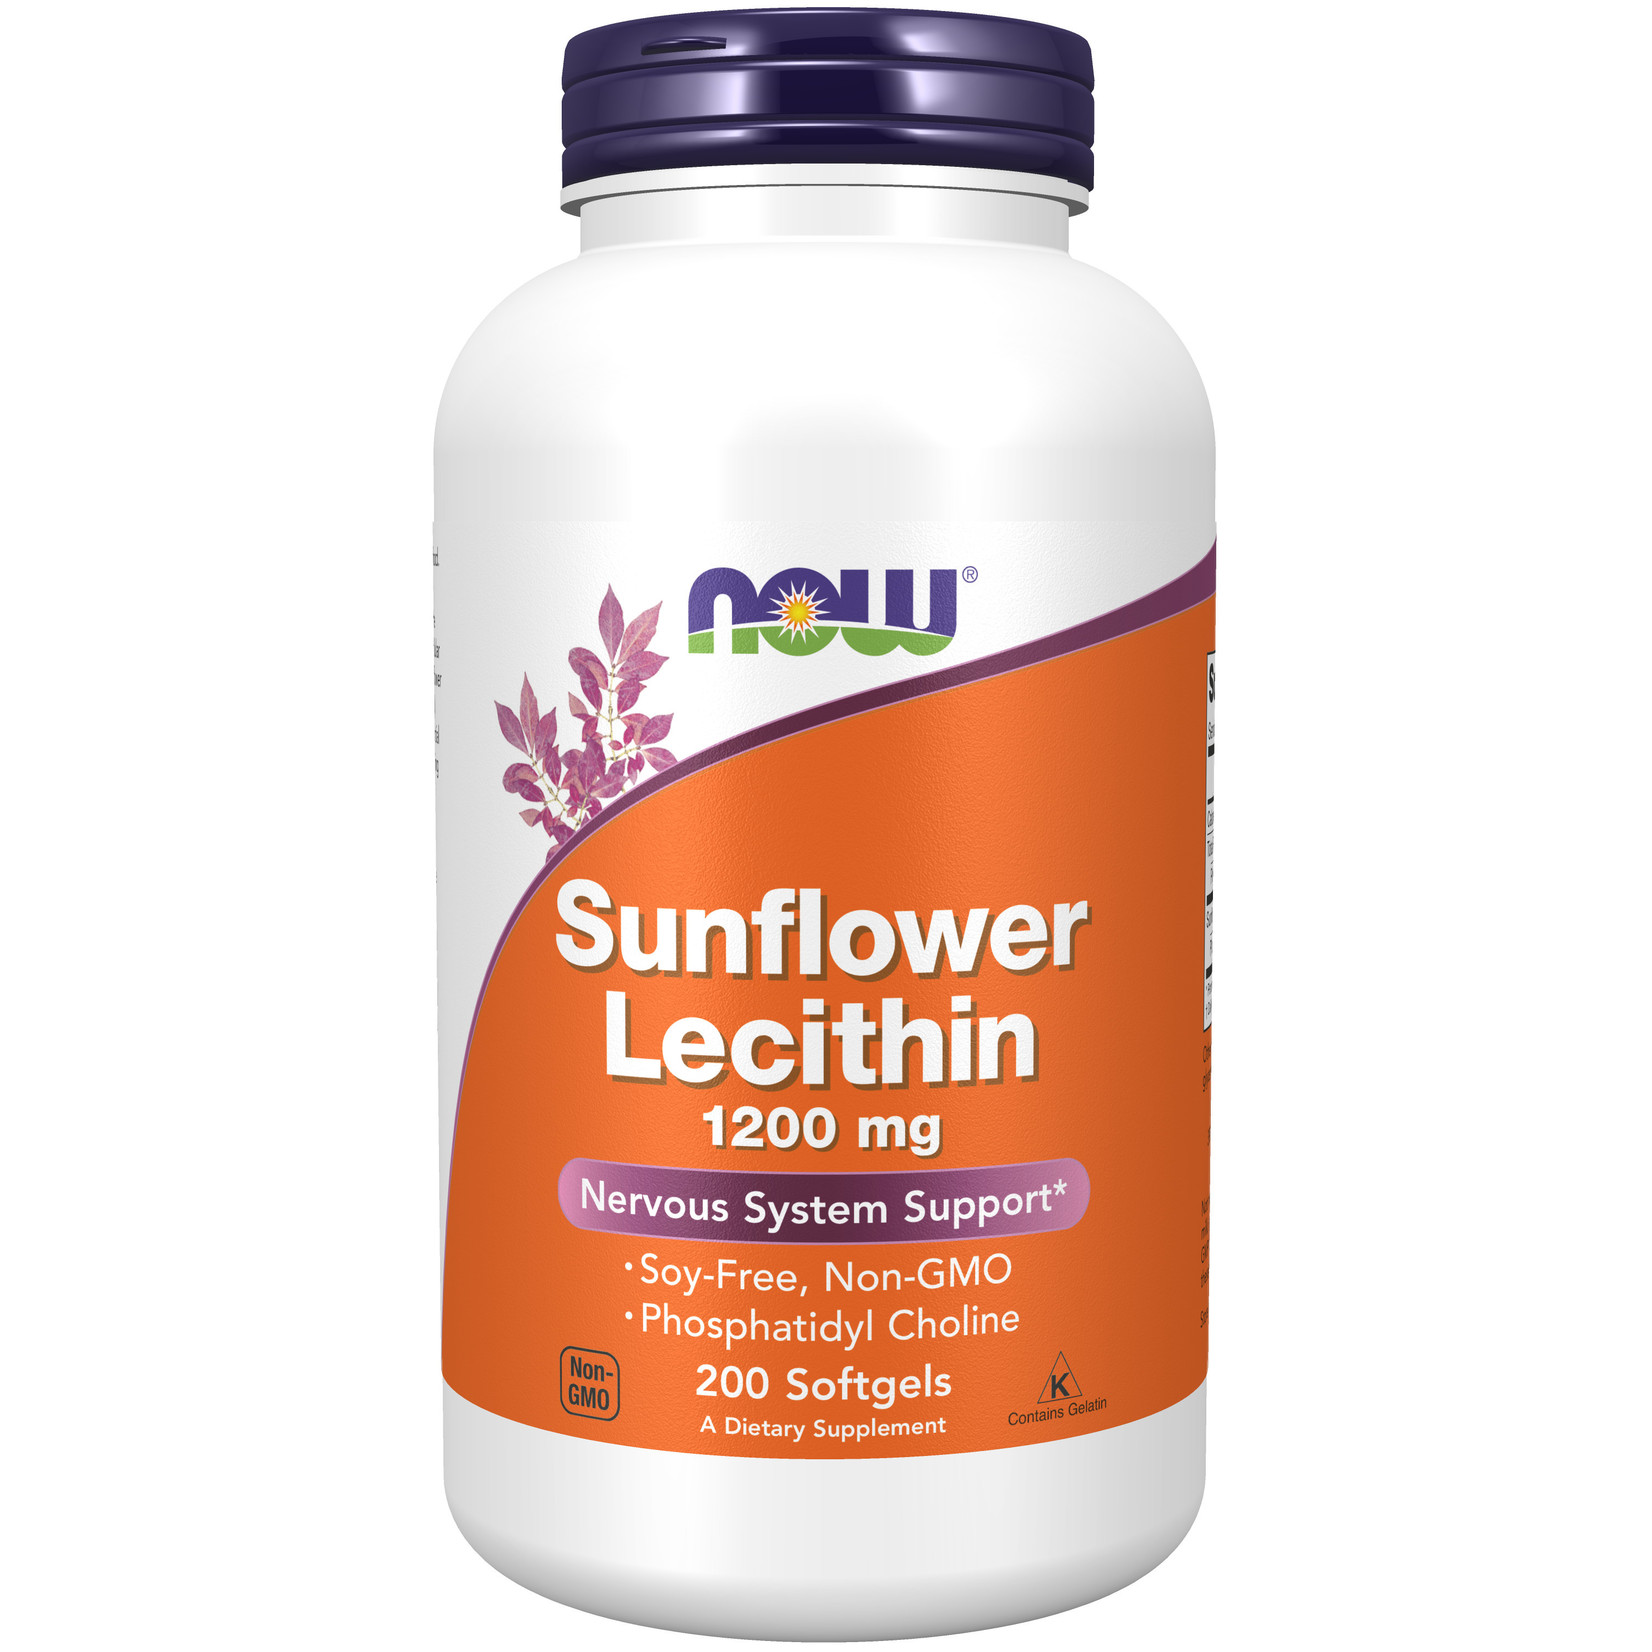 Now Now - Sunflower Lecithin 1200 mg Soy-Free, Non-GMO - 100 Softgels